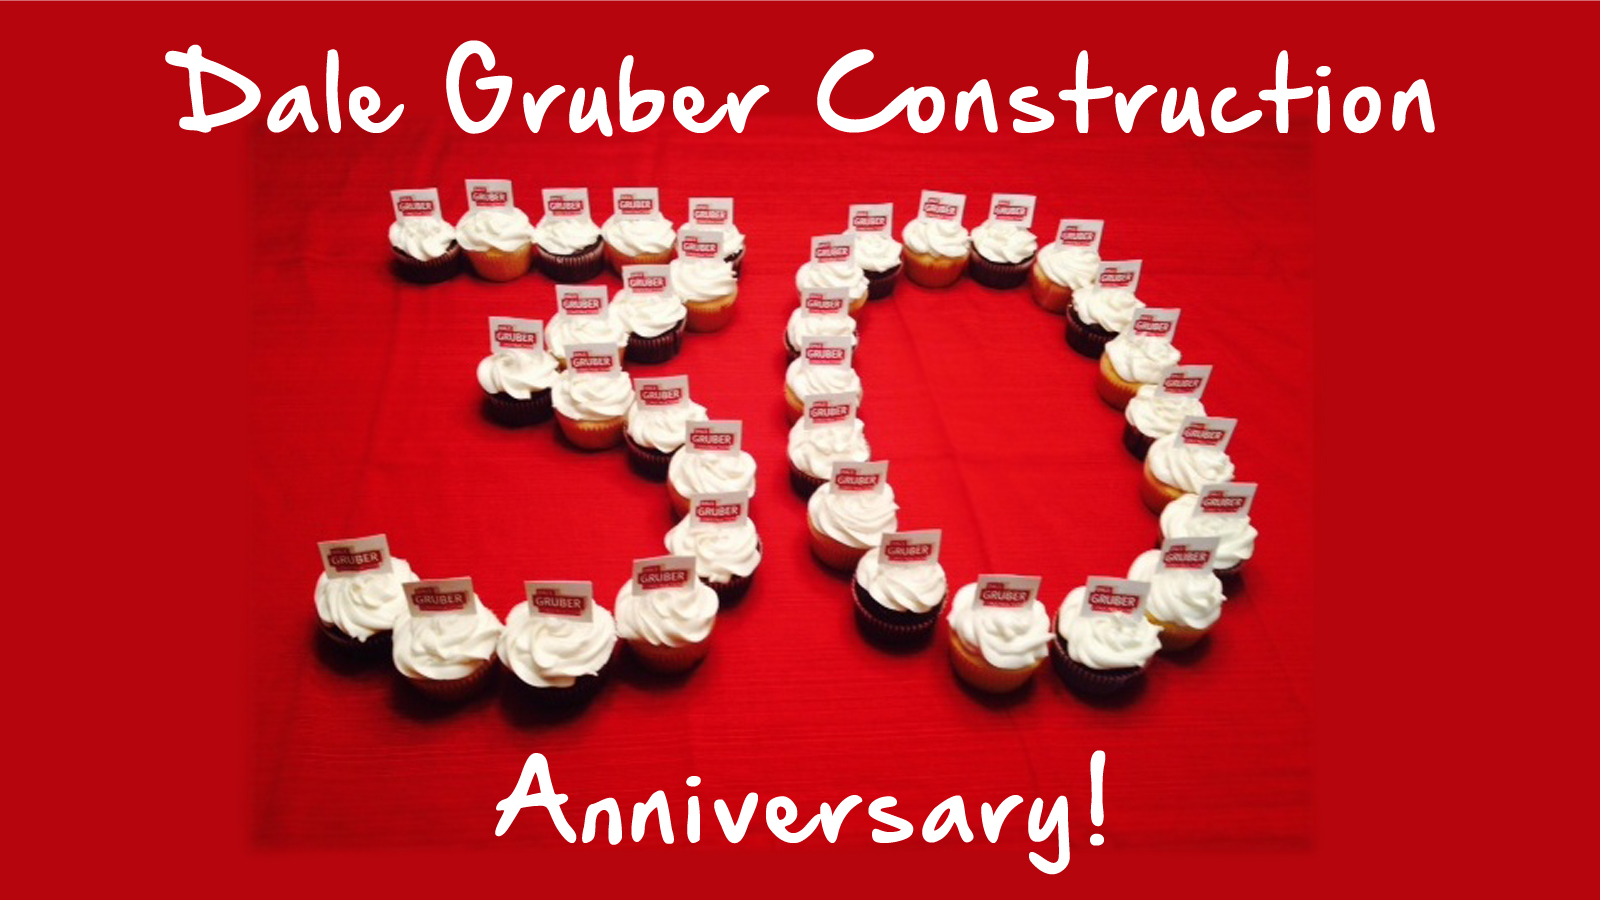 Dale Gruber Construction celebrates 30 years!